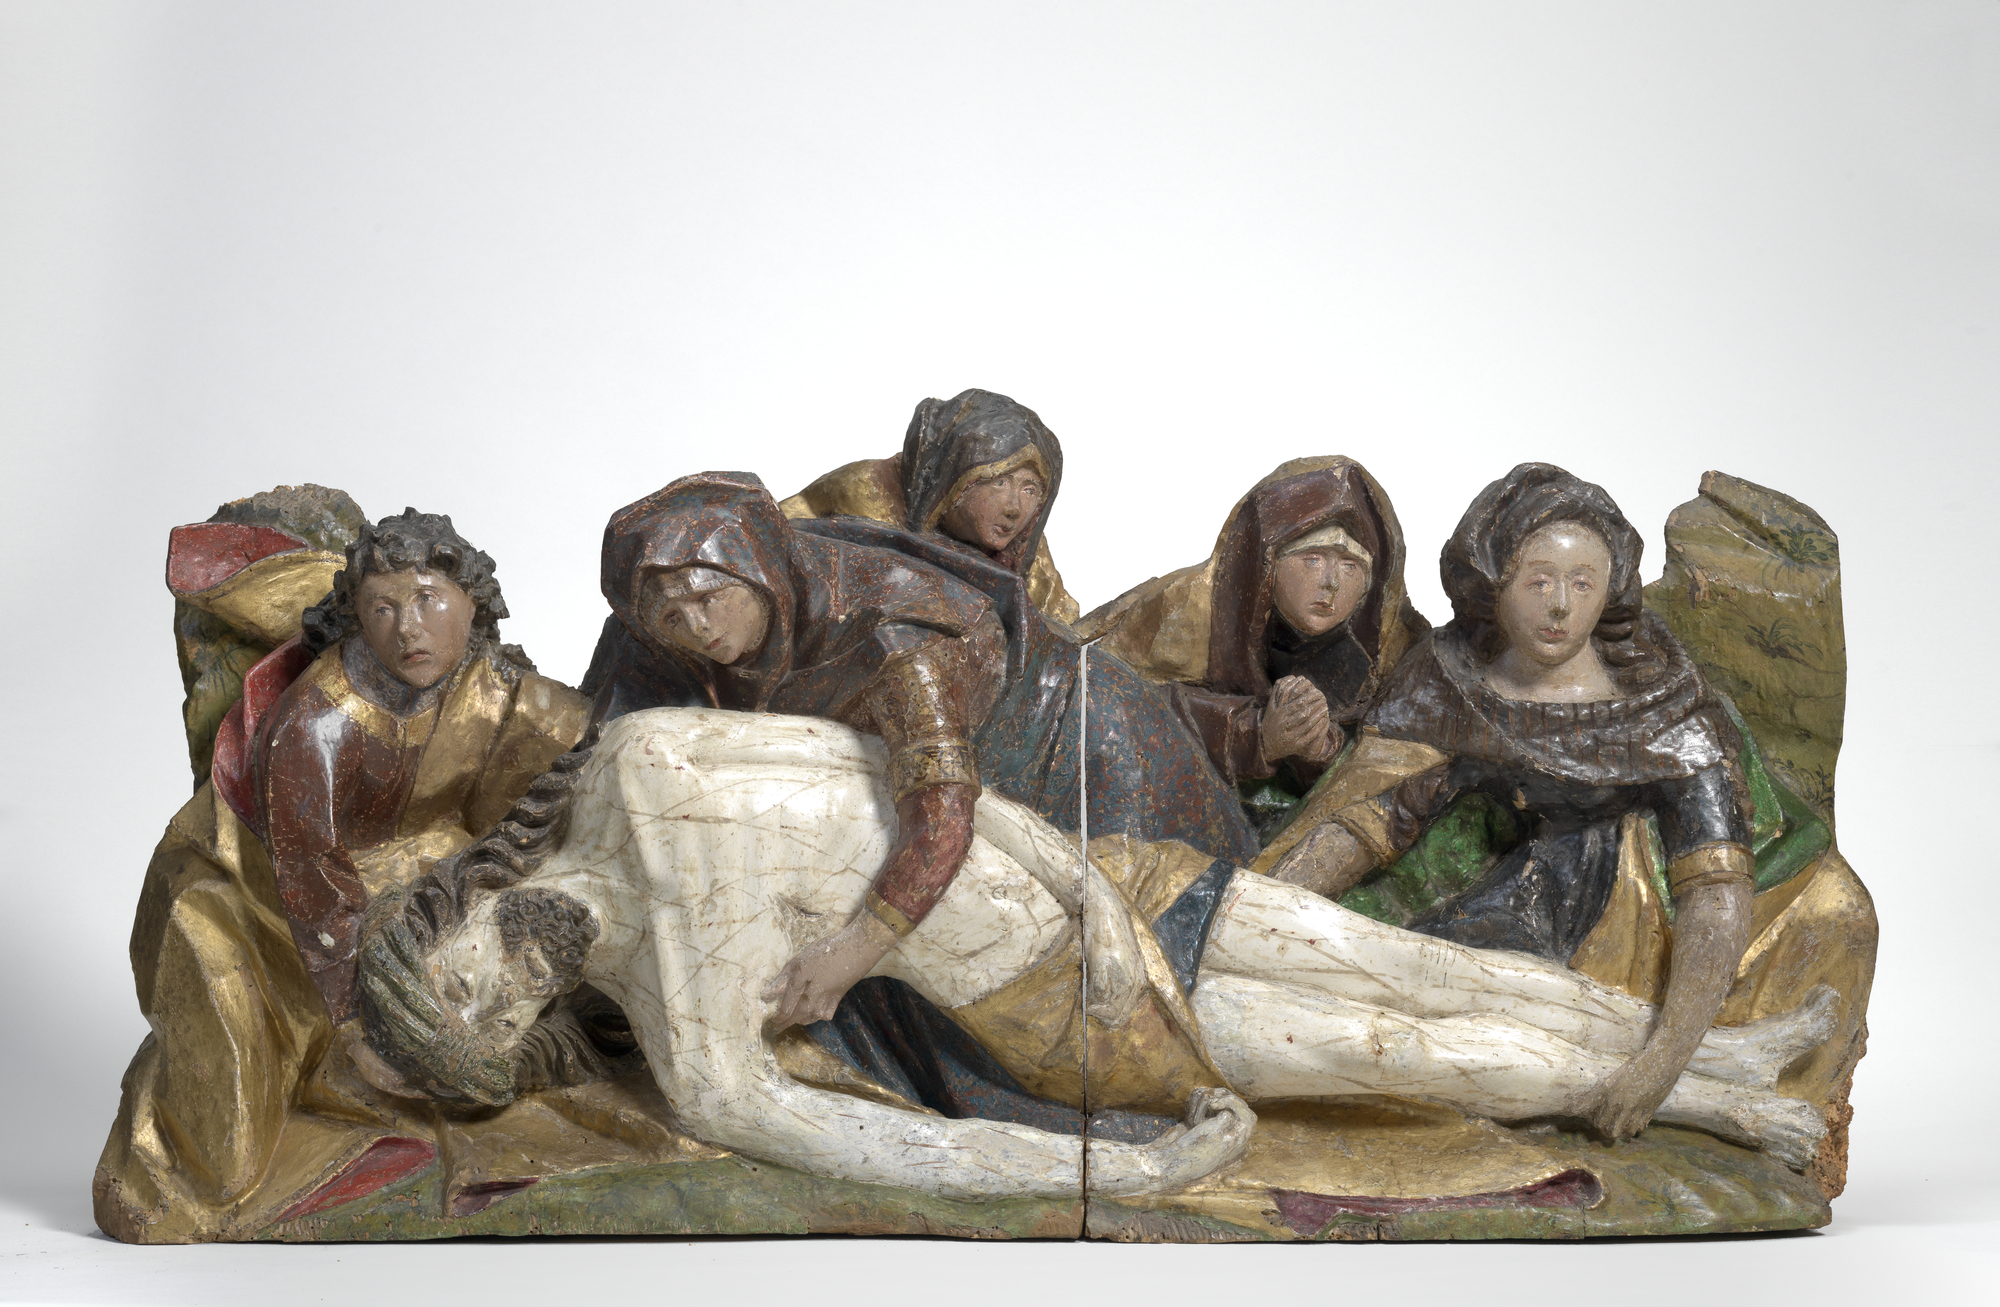 Wooden sculpture of group of women in robes carrying Jesus's body.